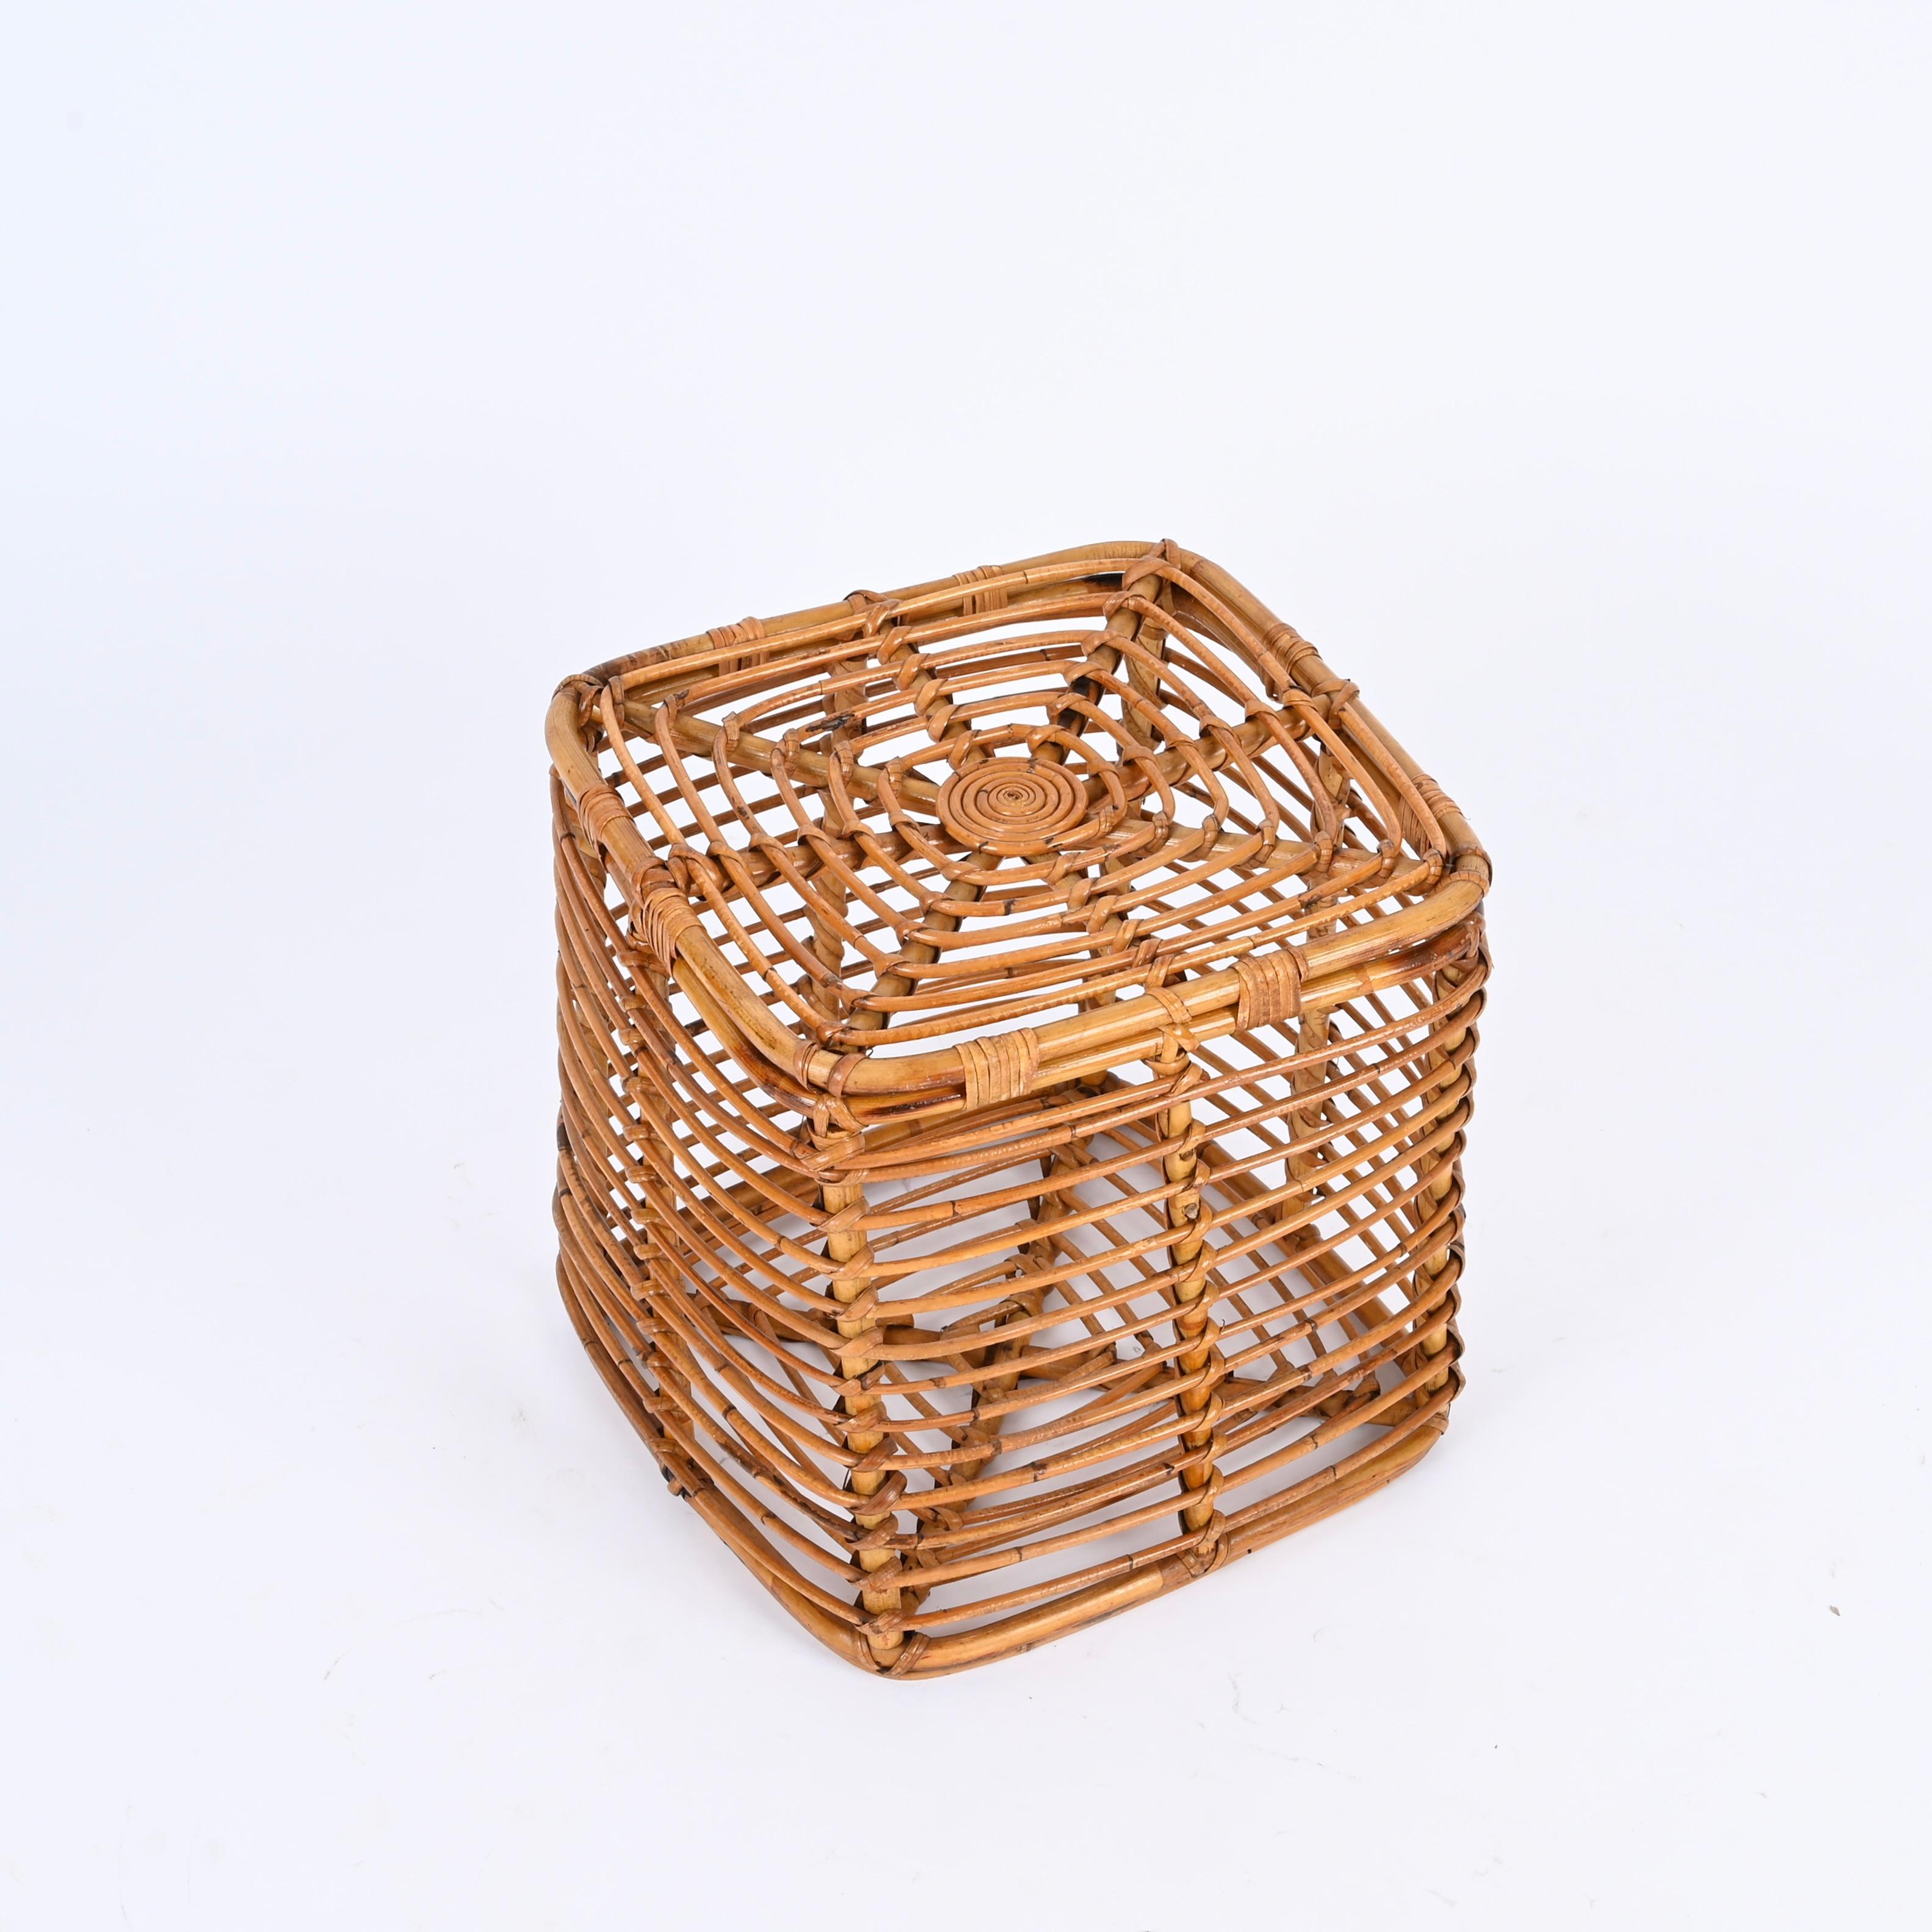 Gorgeous Mid-Century square pouf fully made in curved rattan and hand-woven wicker. This gorgeous French Riviera style pouf was designed by Tito Agnoli and made in Italy during the 1970s.

This stunning pouf is unique thanks to its square-shaped